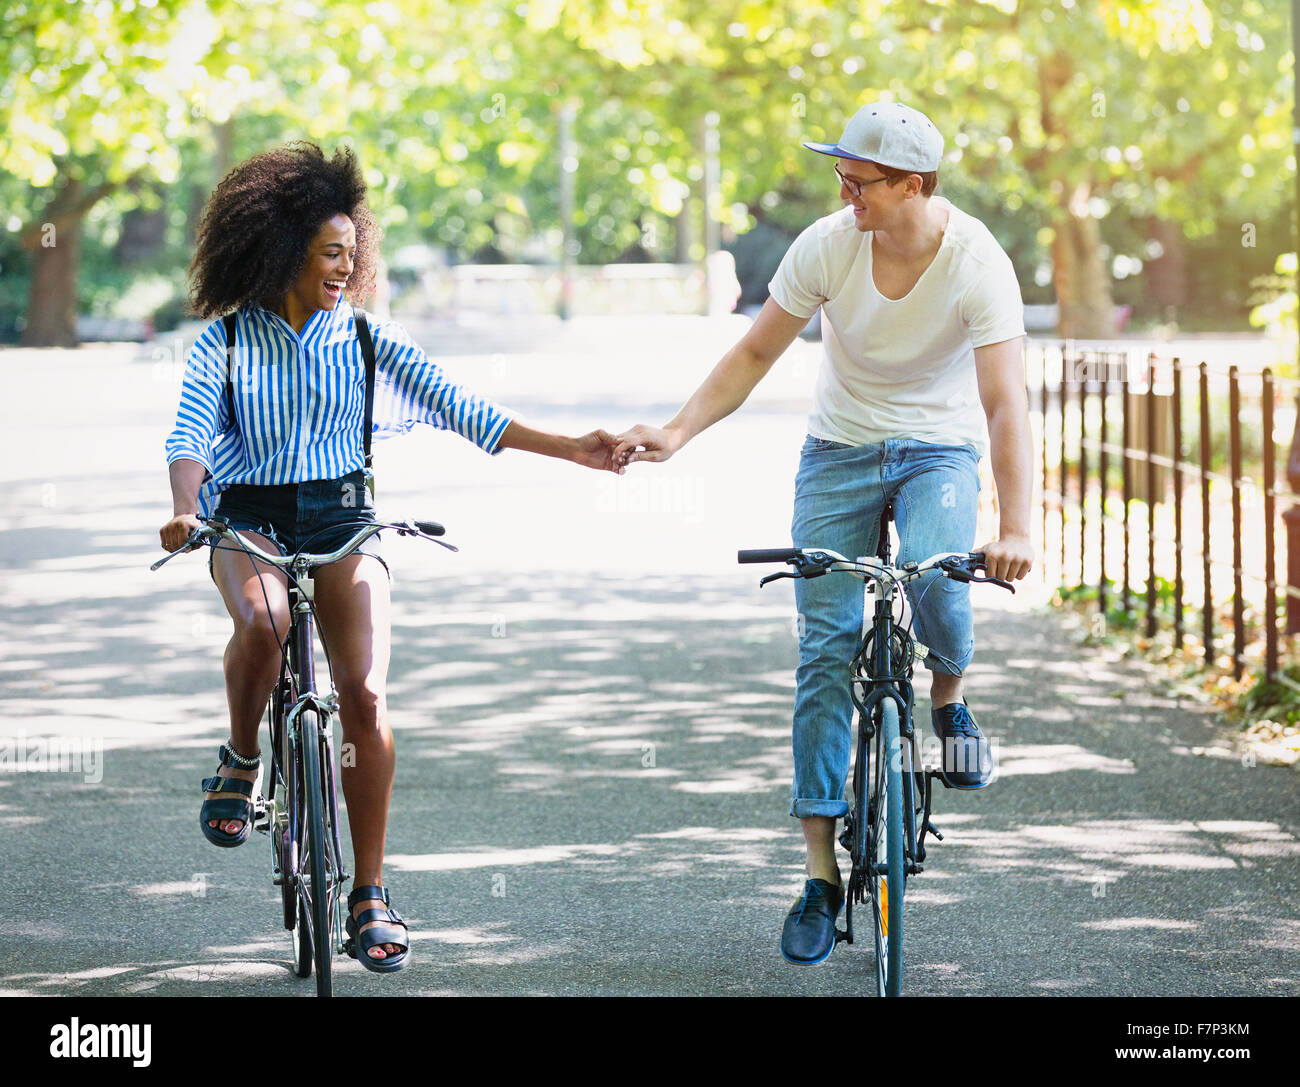 Couple holding hands riding bicycles in urban park Stock Photo